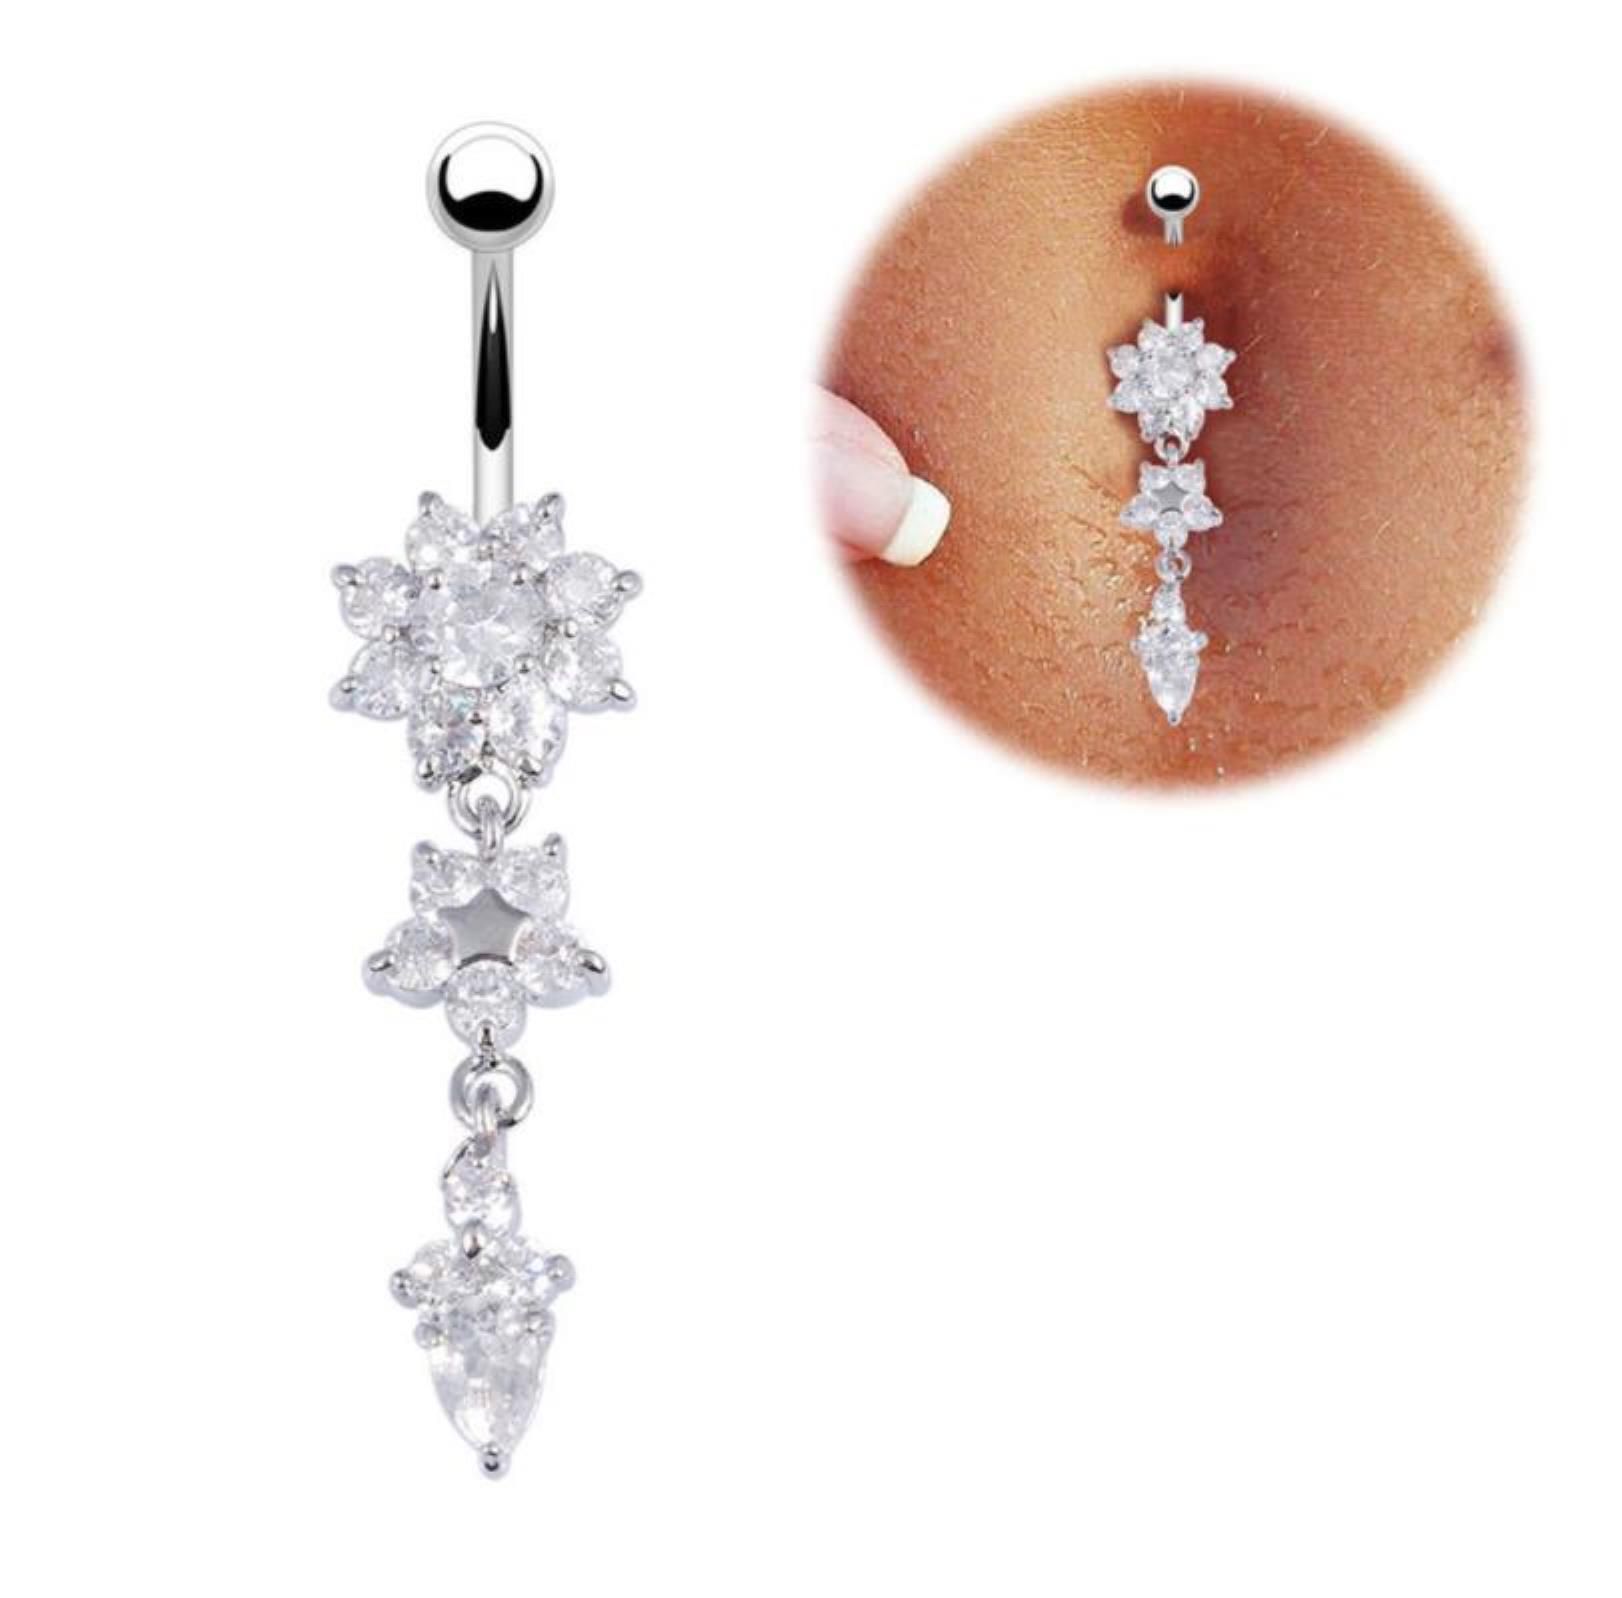 Sexy Dangle Belly Bars Belly Button Rings Belly Piercing Cz Crystal Flower Body Jewelry Navel Piercing Rings Drop Shipping Mya30